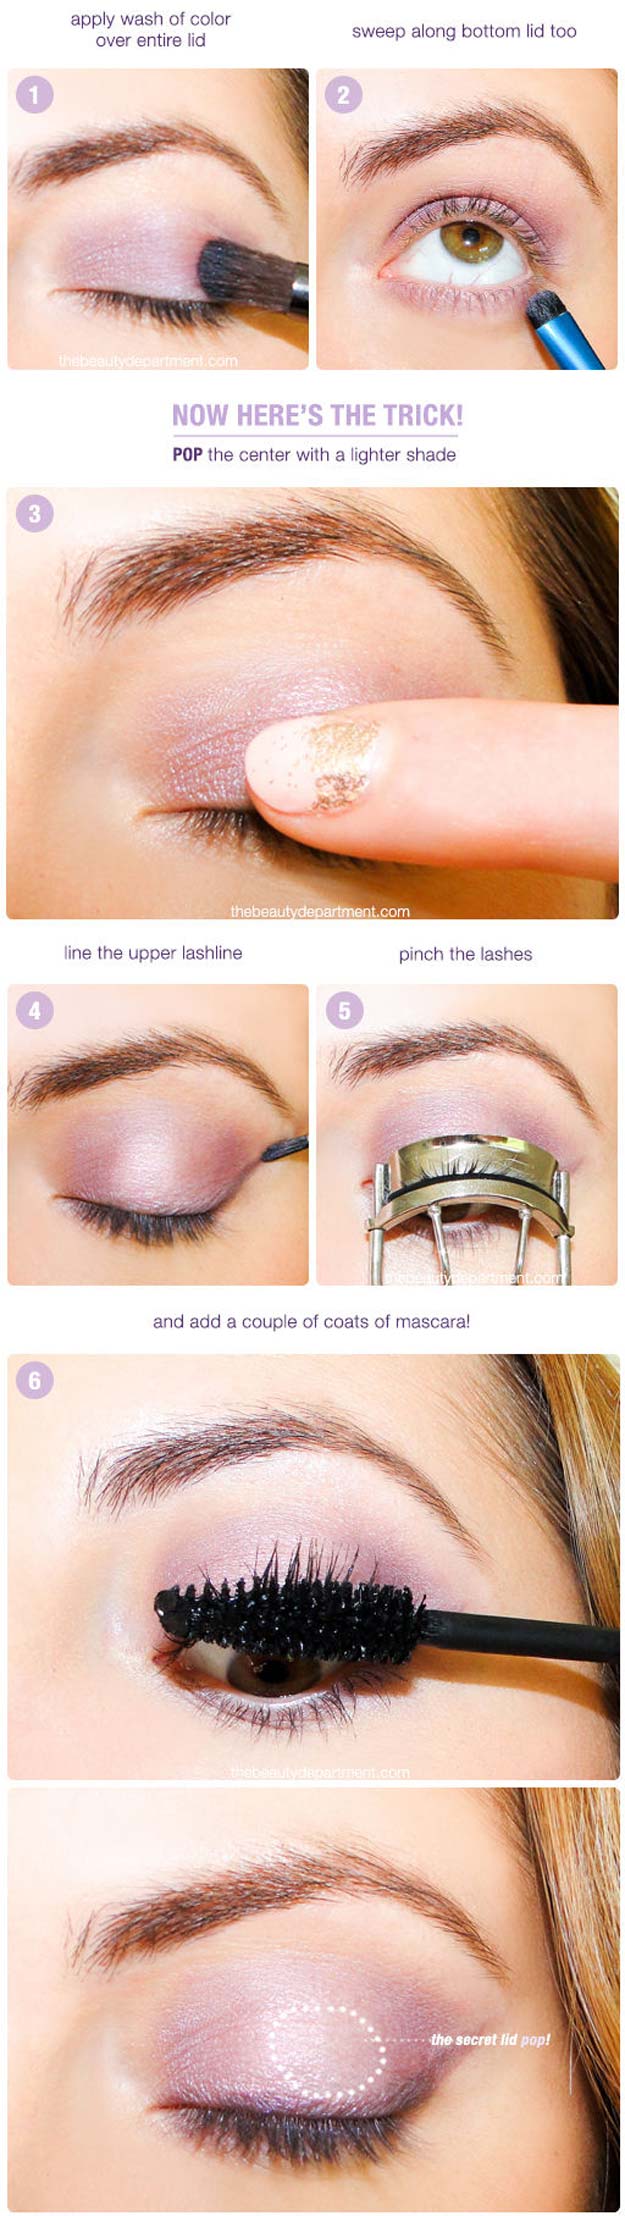 Best Eyeshadow Tutorials - Eye Shadow Enlightenment - Easy Step by Step How To For Eye Shadow - Cool Makeup Tricks and Eye Makeup Tutorial With Instructions - Quick Ways to Do Smoky Eye, Natural Makeup, Looks for Day and Evening, Brown and Blue Eyes - Cool Ideas for Beginners and Teens 